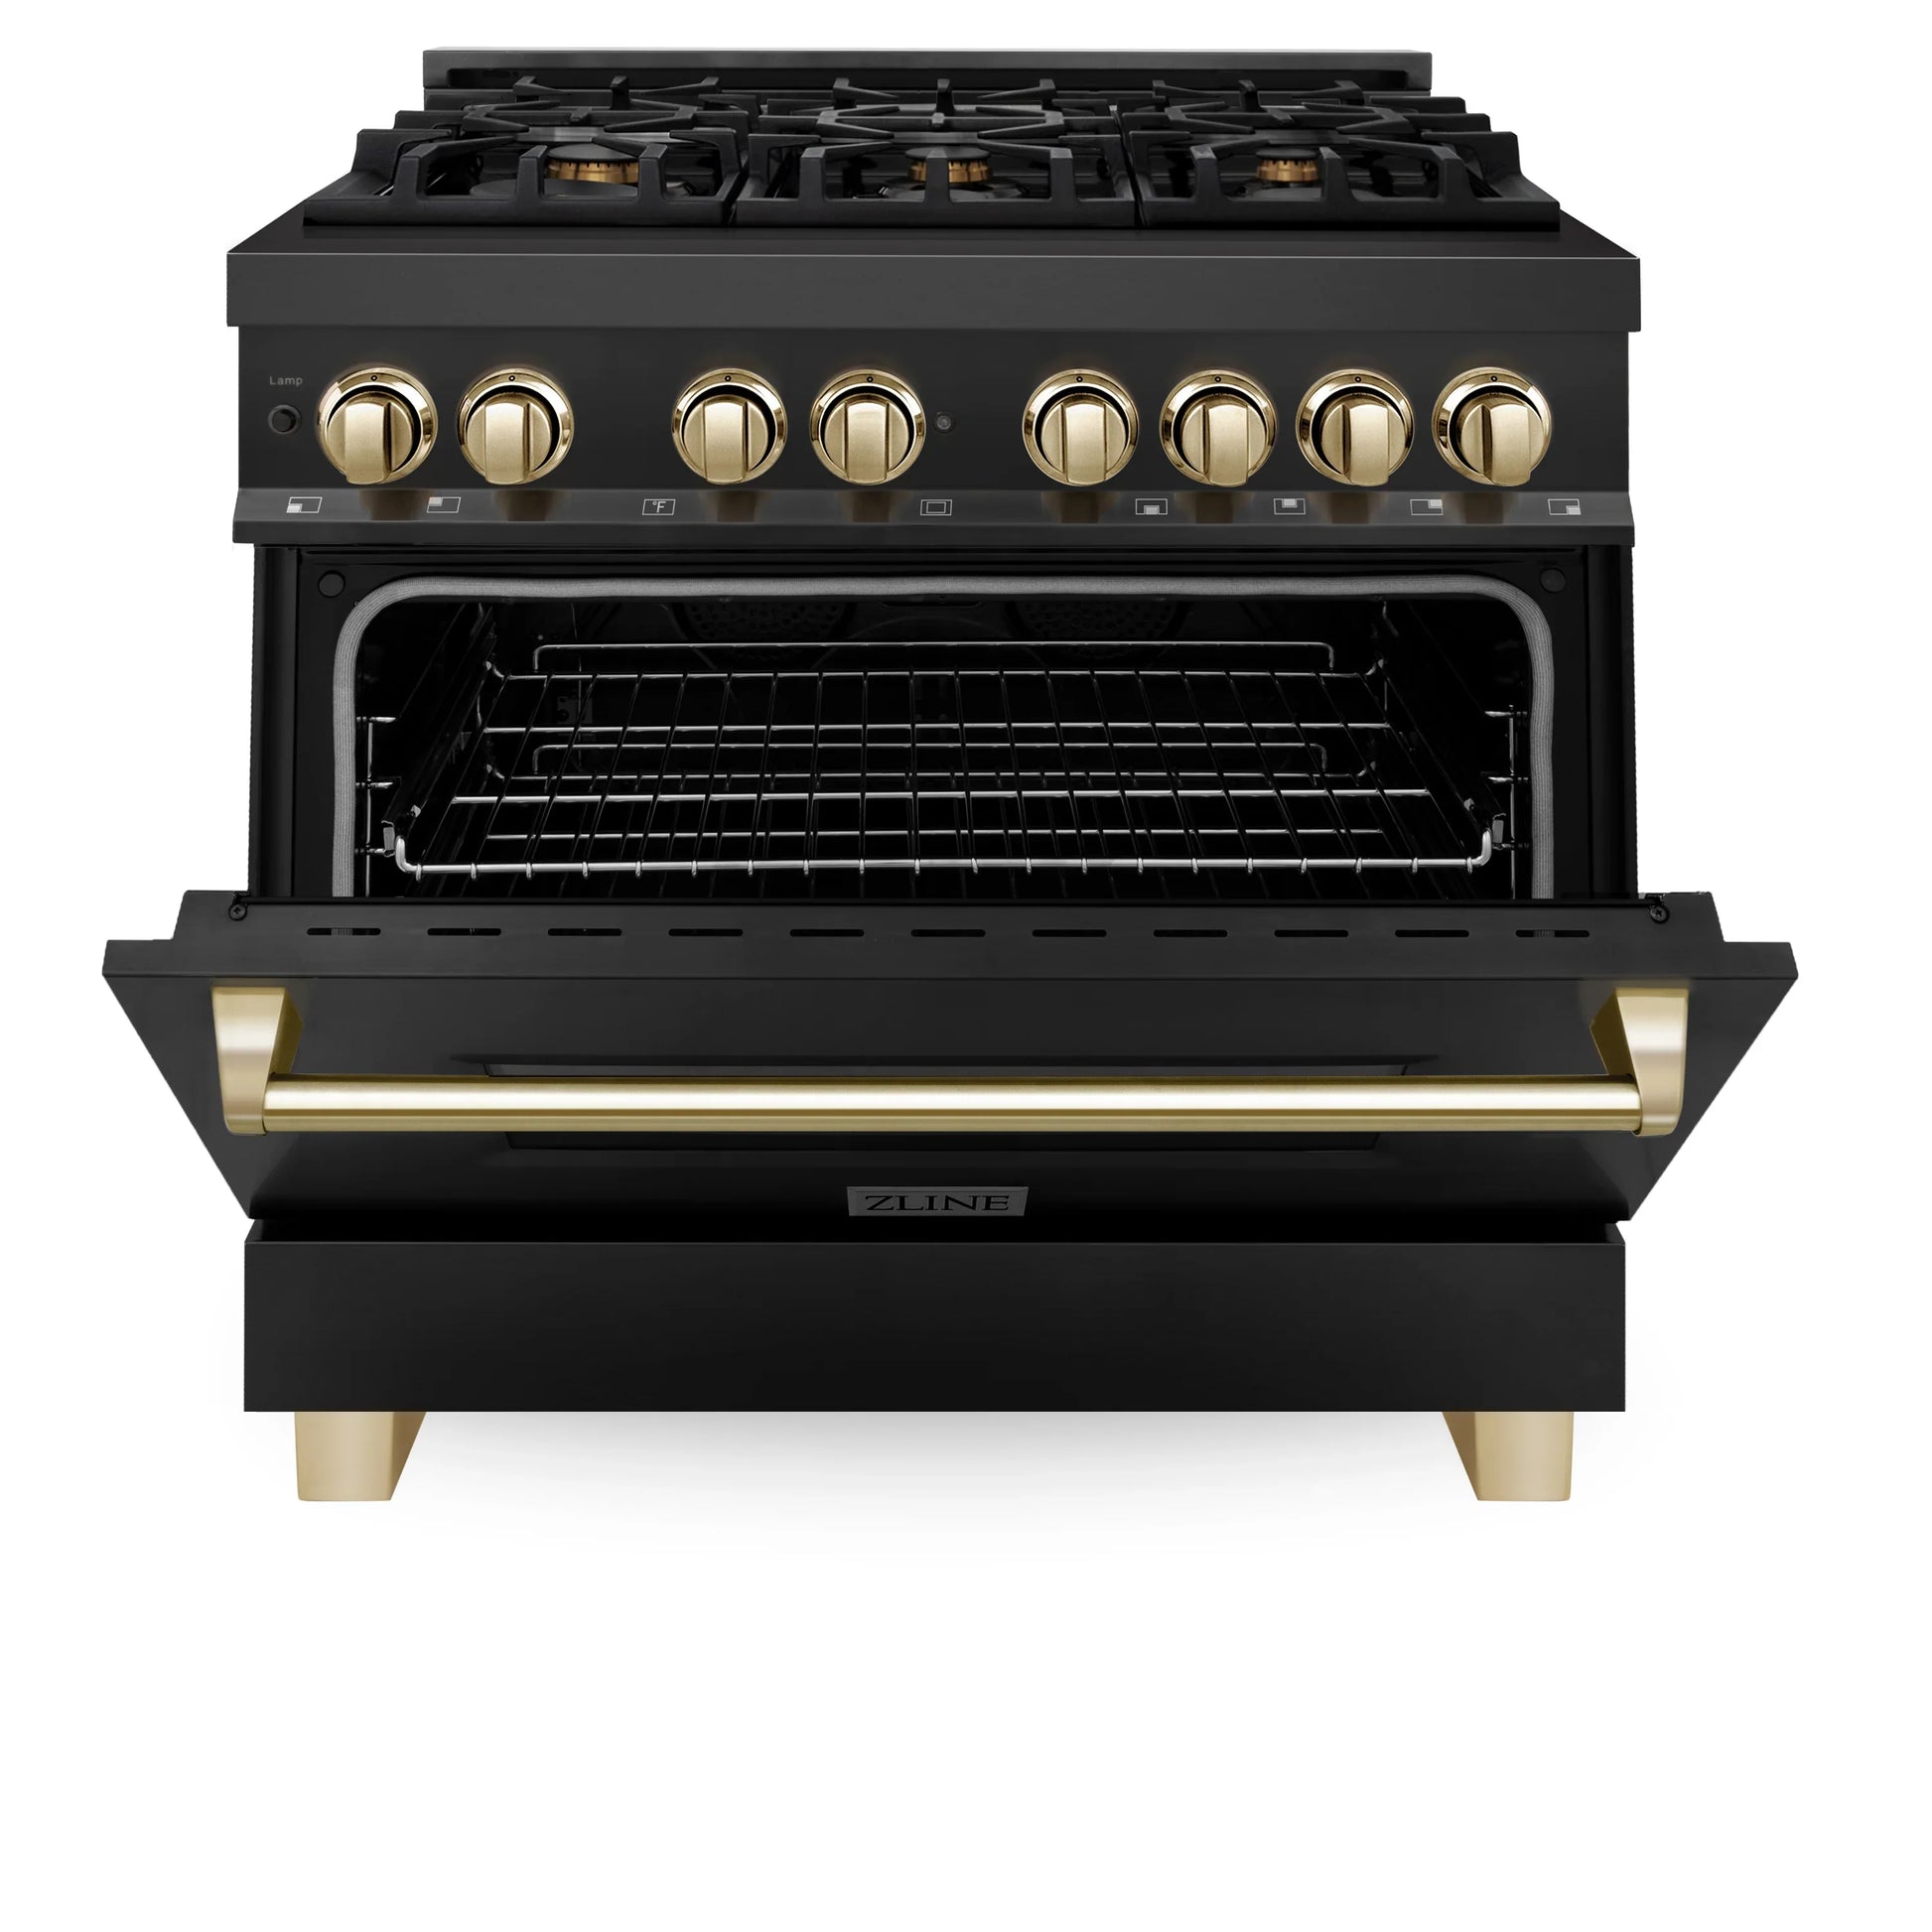 ZLINE Autograph Edition 36" Dual Fuel Range with Gas Stove and Electric Oven - Black Stainless Steel, Champagne Bronze Accents